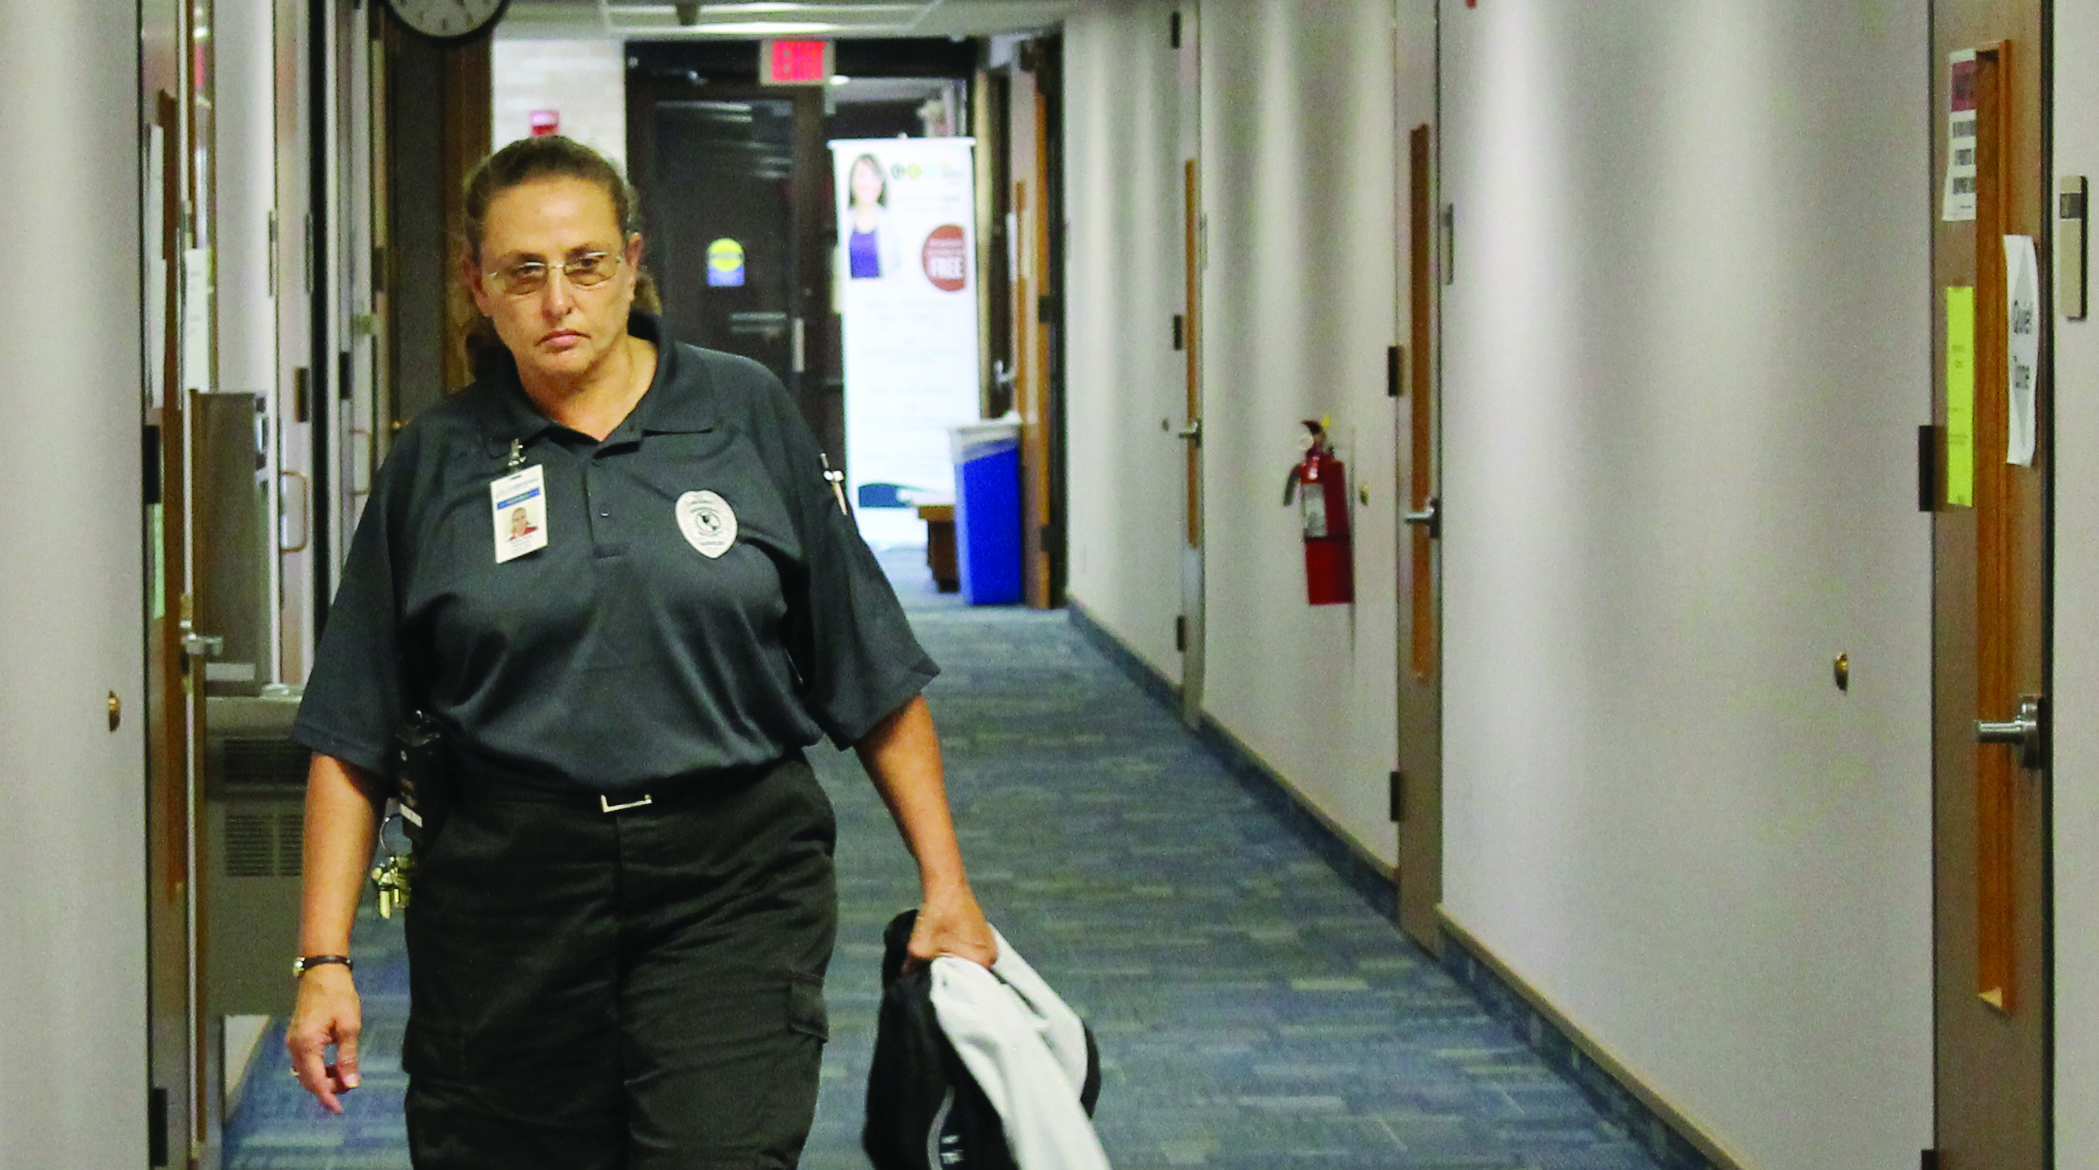 Faculty finds fire system alarming